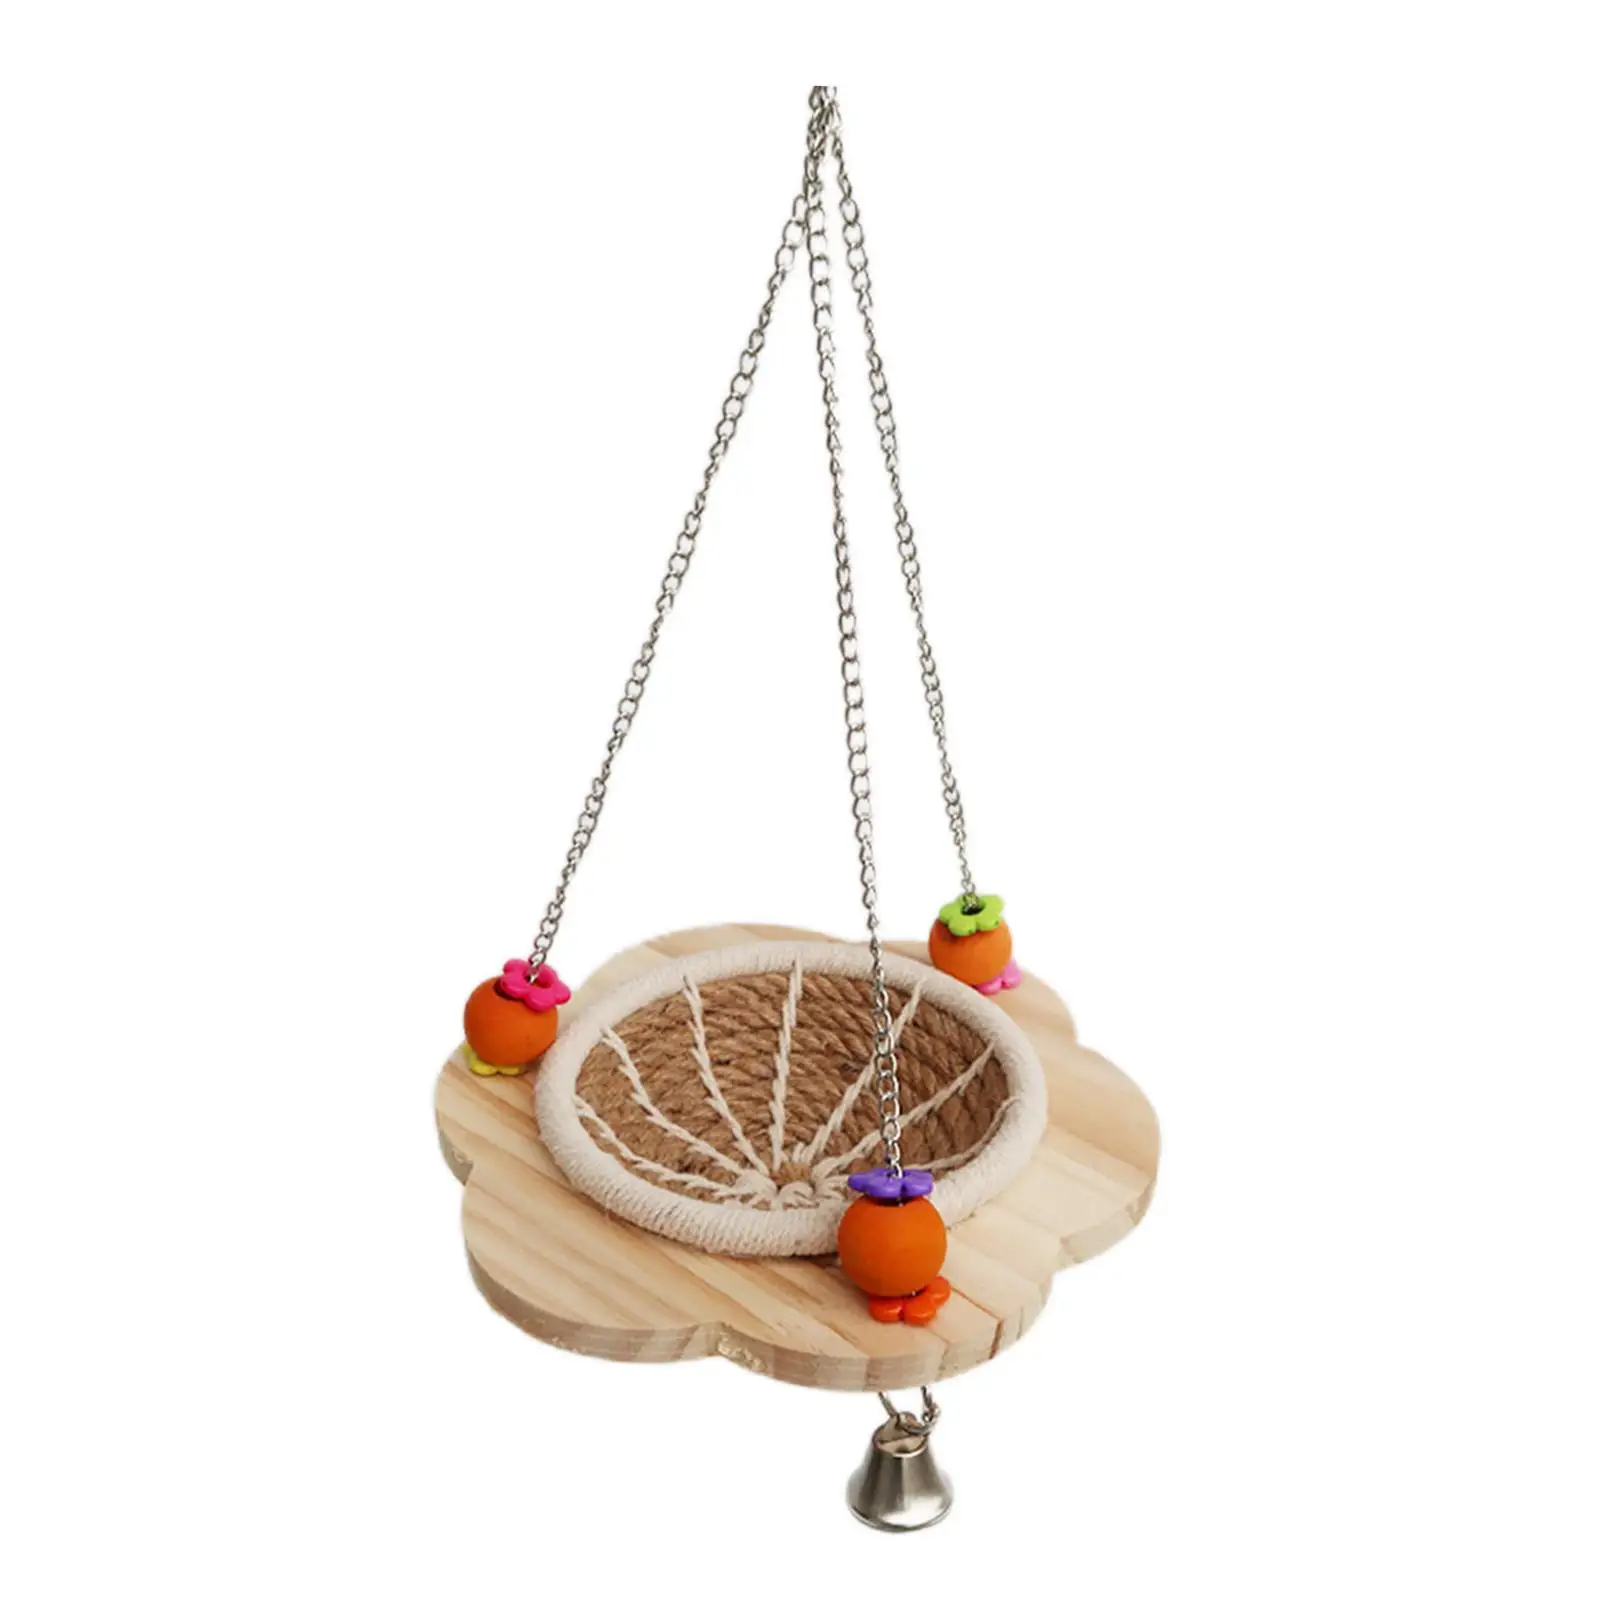 Bird Swing Toy Bird House Cockatiel Macaws Colorful Wooden Finches Parakeet Hanging Toys for Cockatiels Parrot Toy Bird Bell Toy